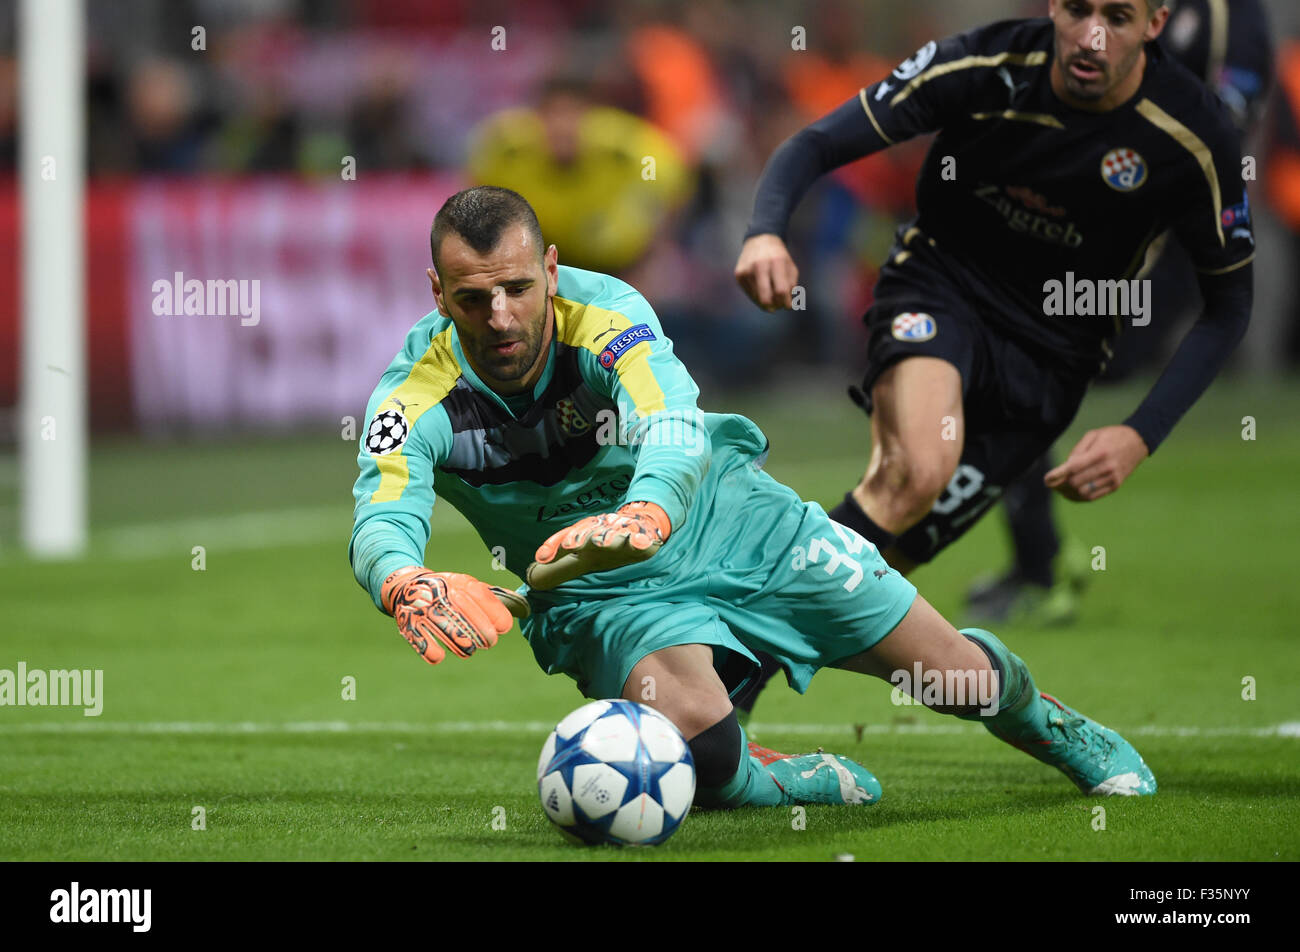 Munich, Germany. 29th Sep, 2015. Zagreb's goalkeeper Eduardo  in action during the Champions League Group F match Bayern Munich vs Dinamo Zagreb in Munich, Germany, 29 September 2015. Credit:  dpa picture alliance/Alamy Live News Stock Photo